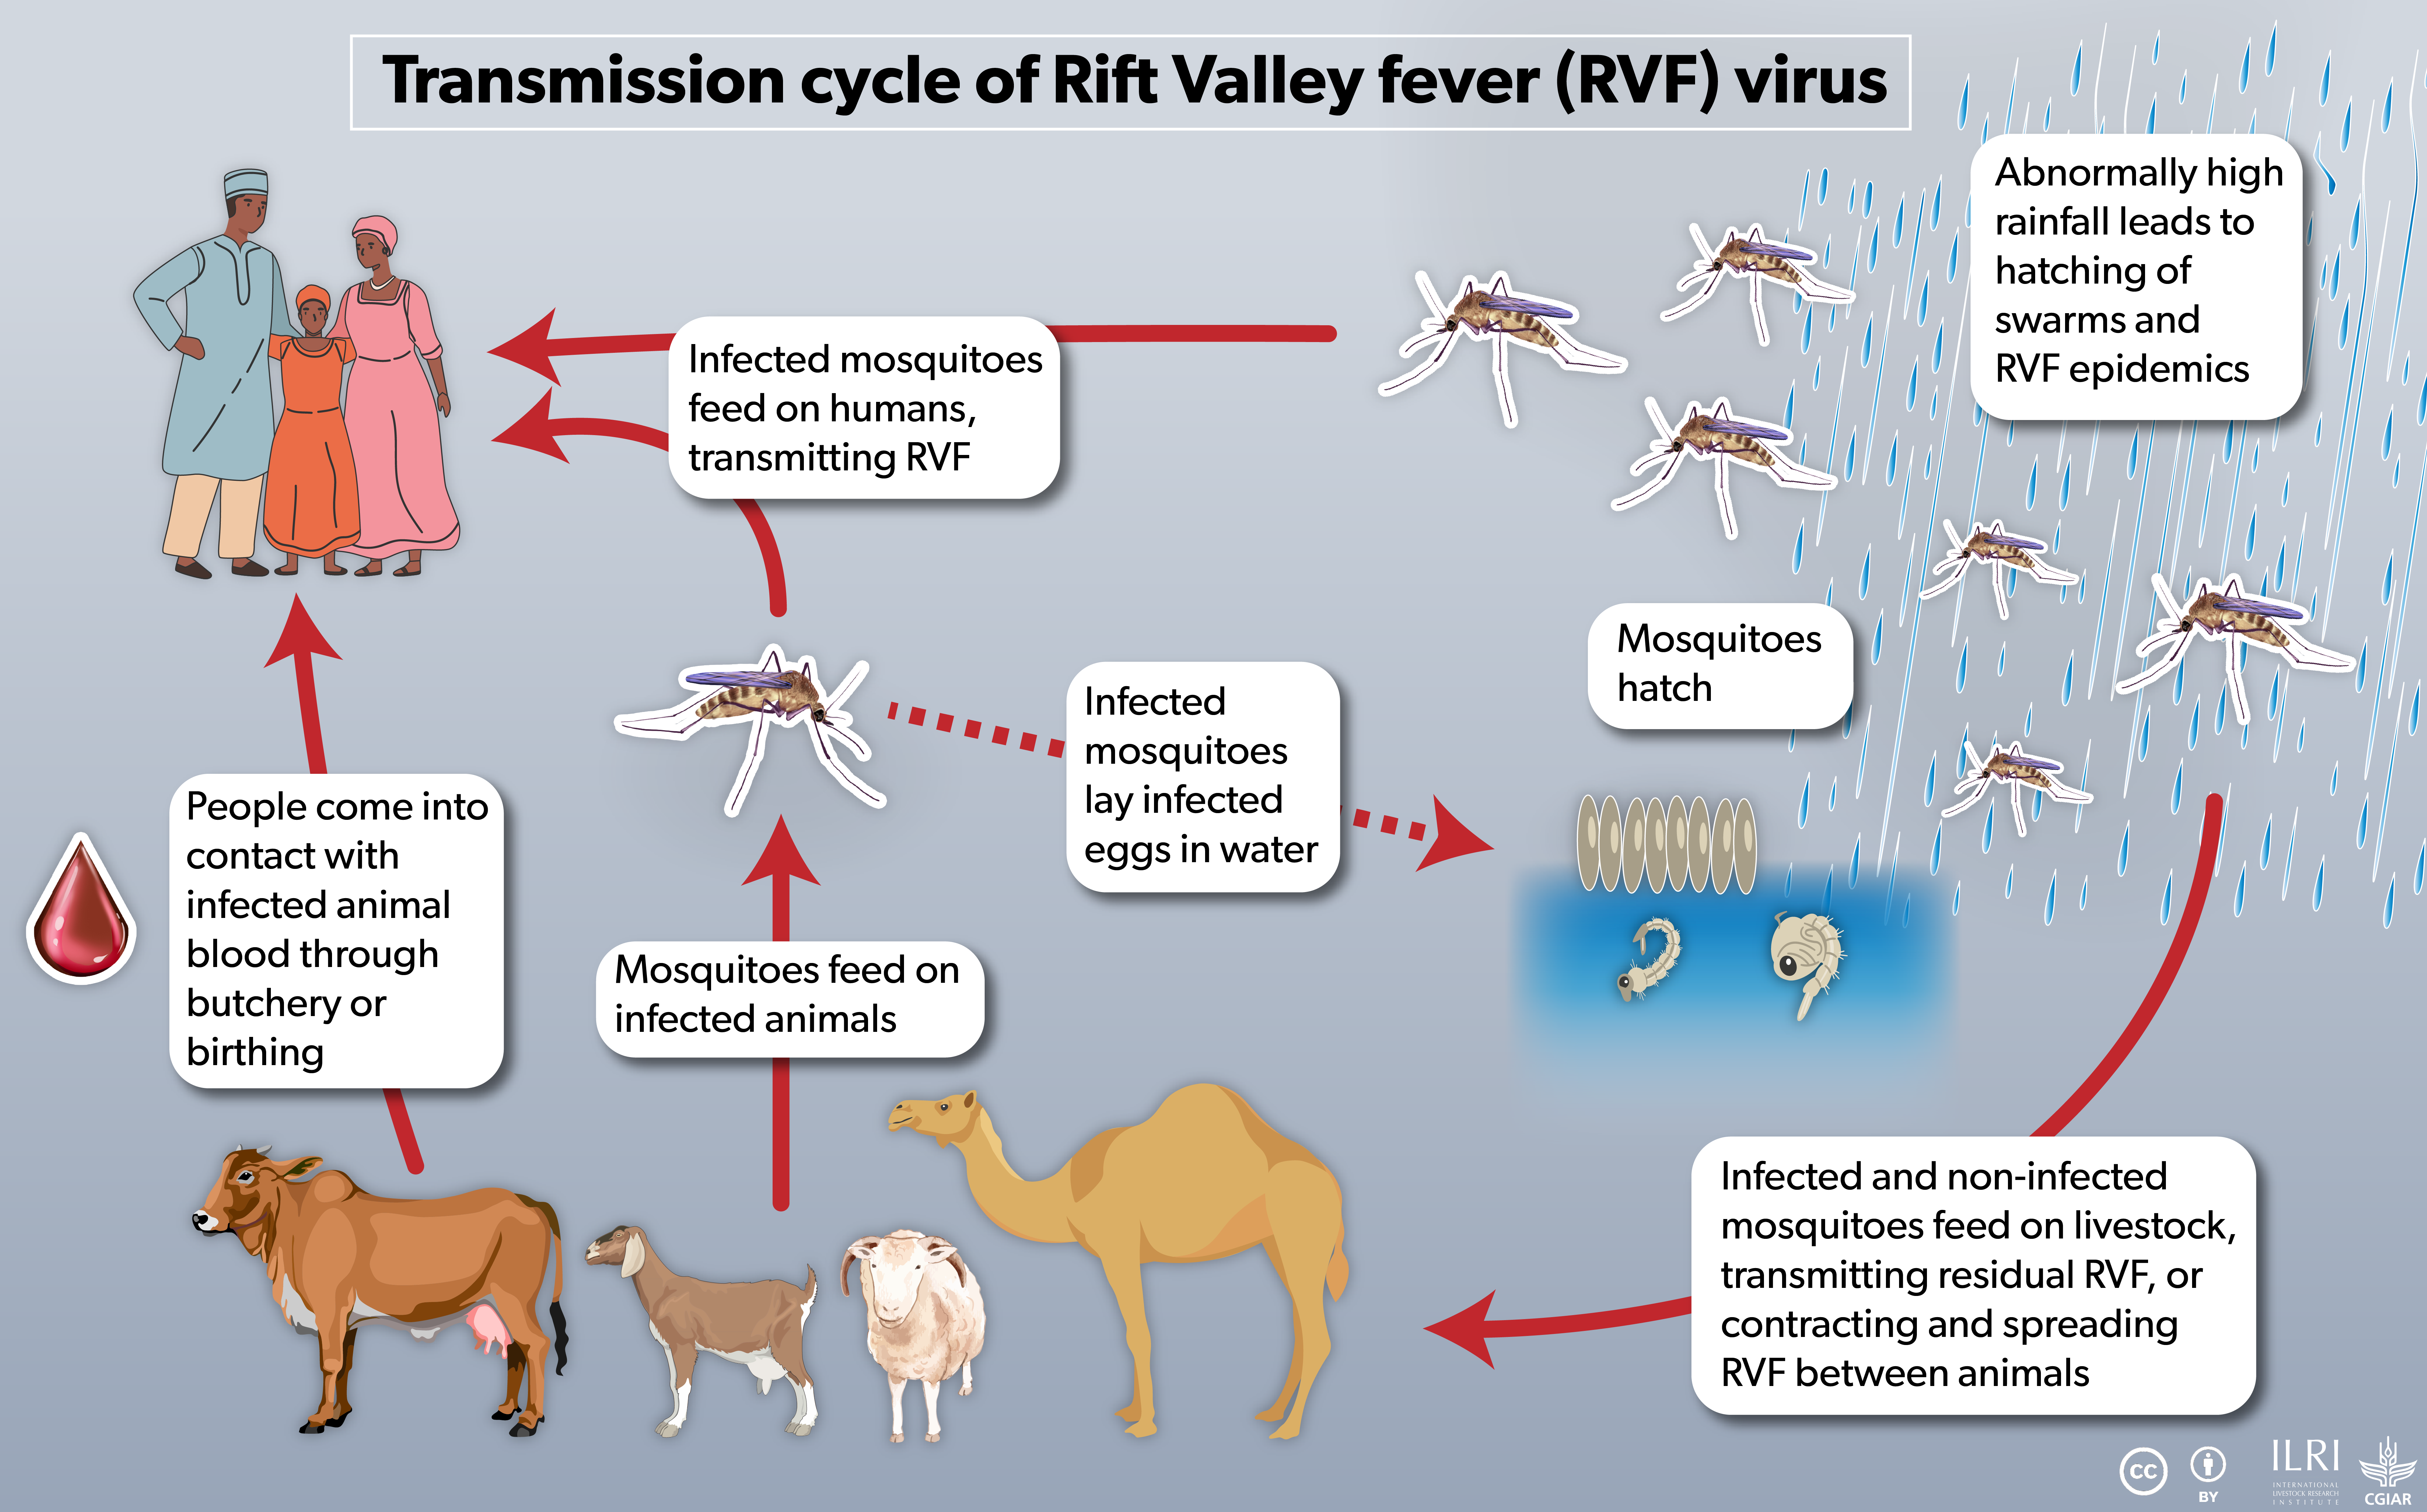 Infographic showing transmission cycle of Rift Valley fever between livestock and humans